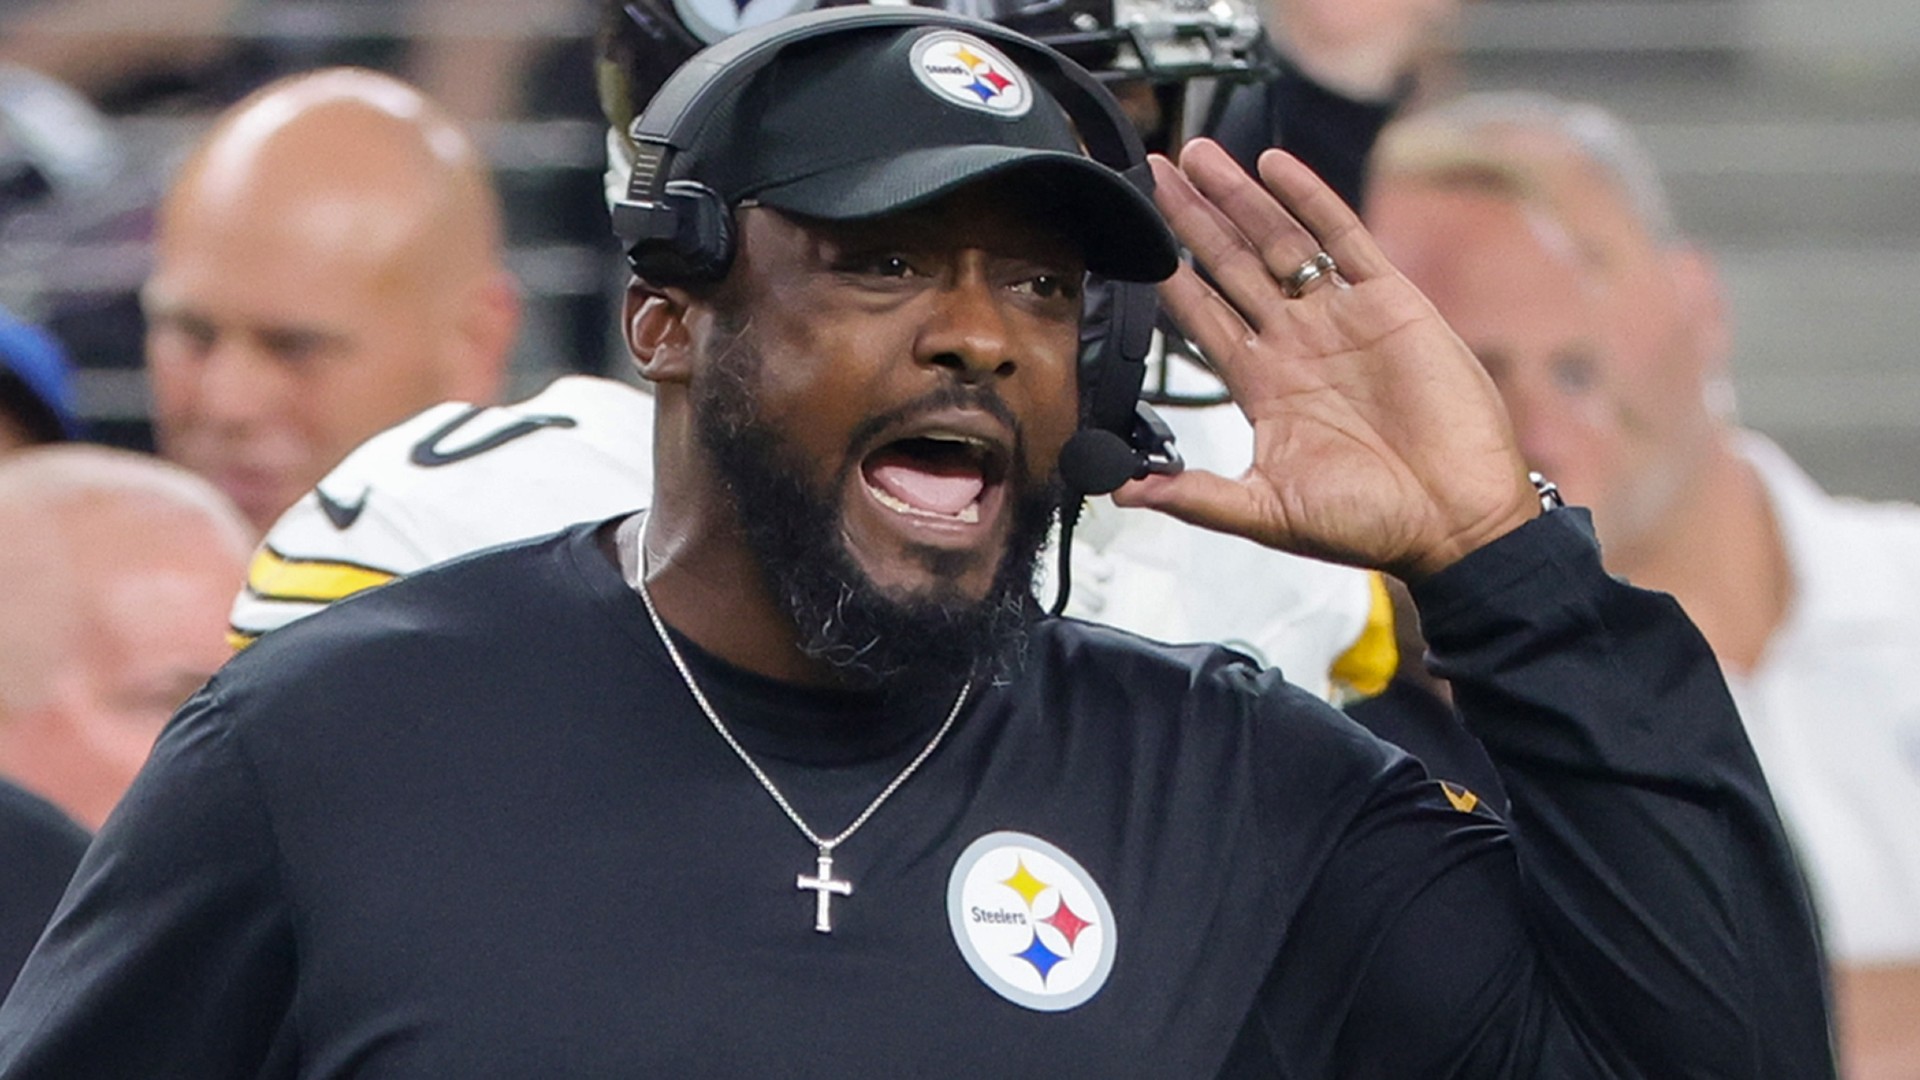 will the steelers fire mike tomlin? years of success can't stop critics from searching for something different